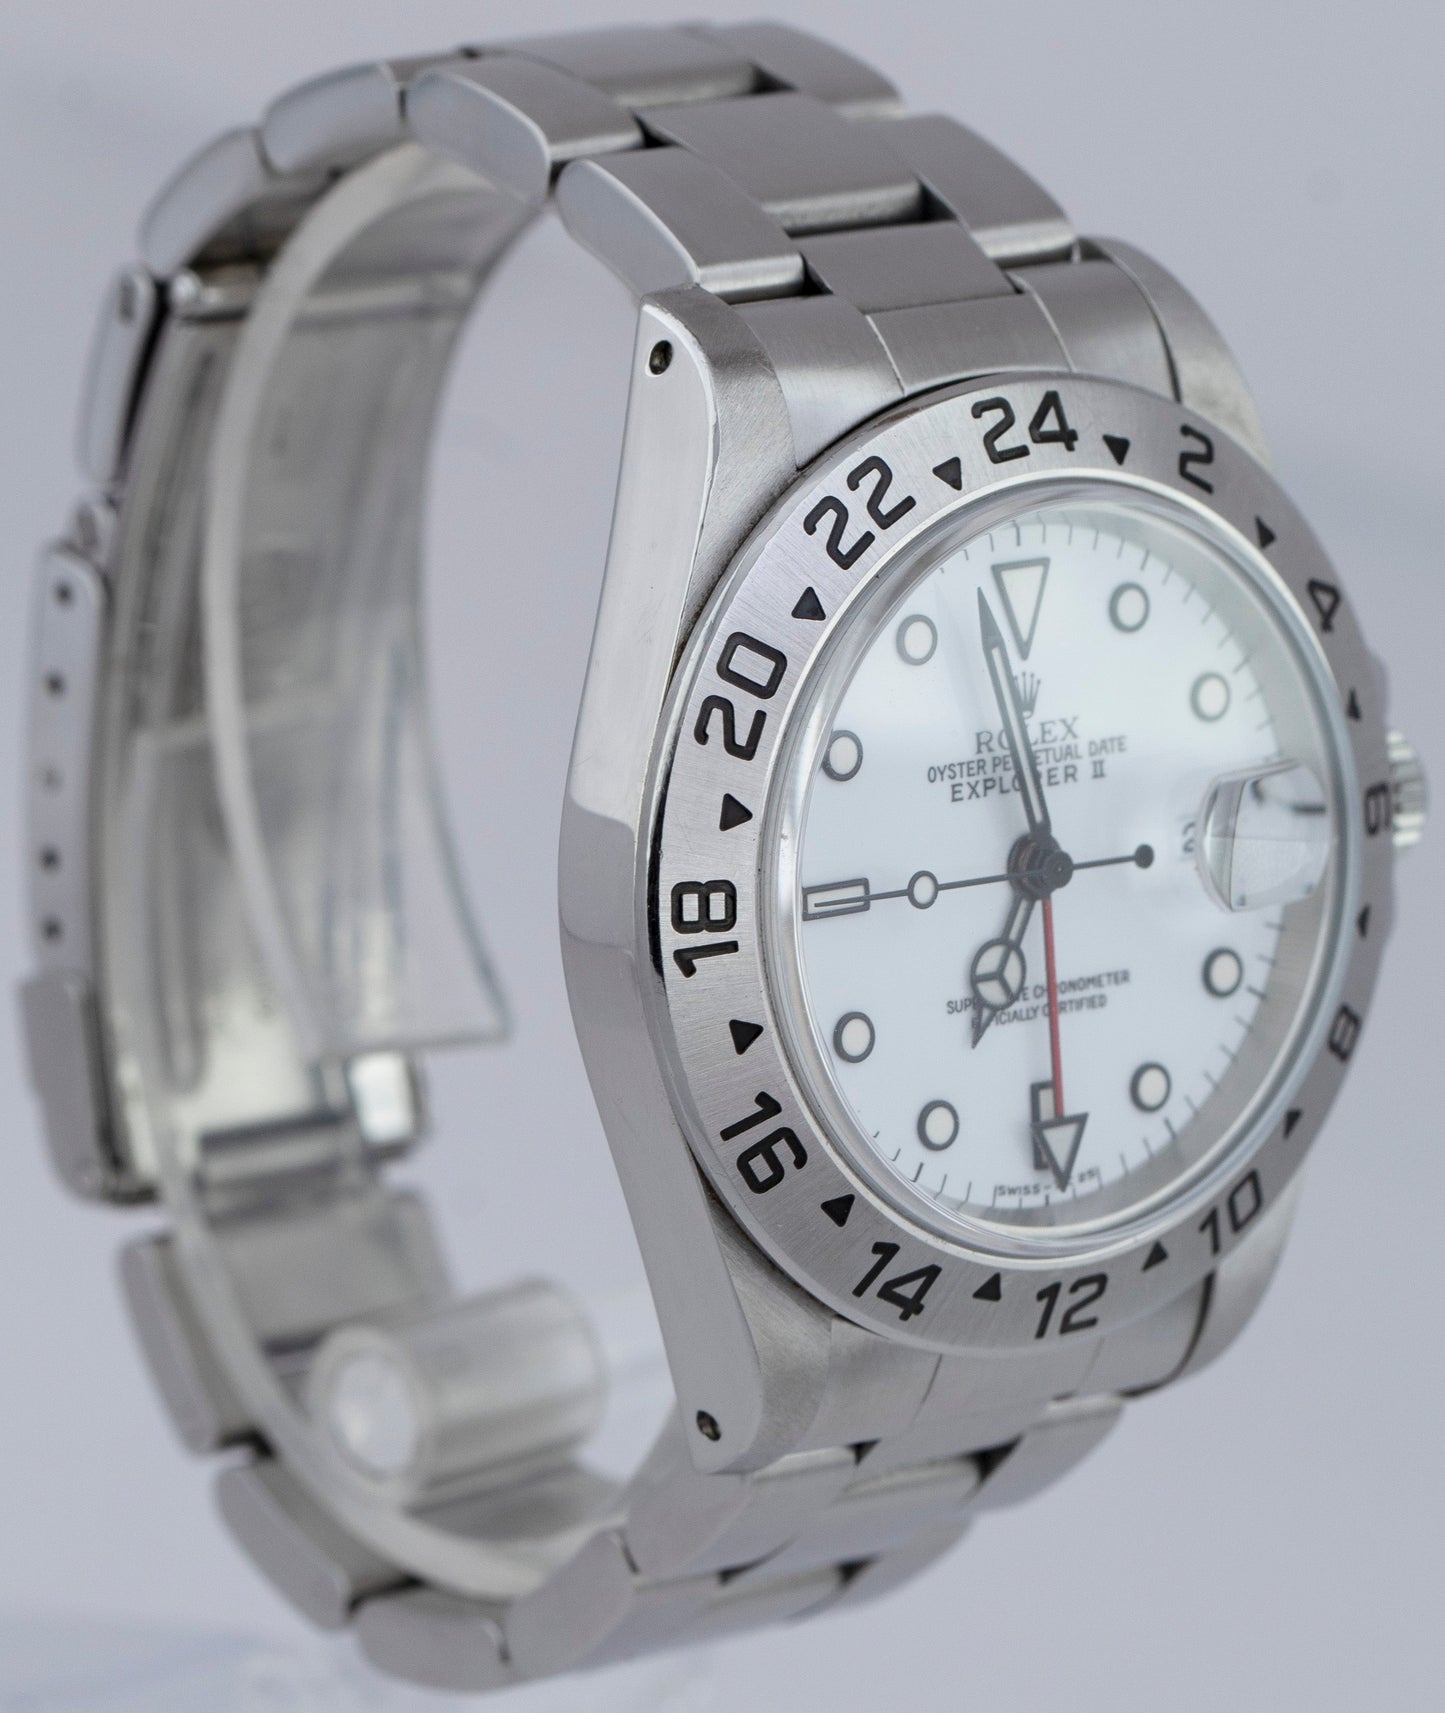 Rolex Explorer II Polar White Stainless Steel Automatic GMT 40mm Watch 16570